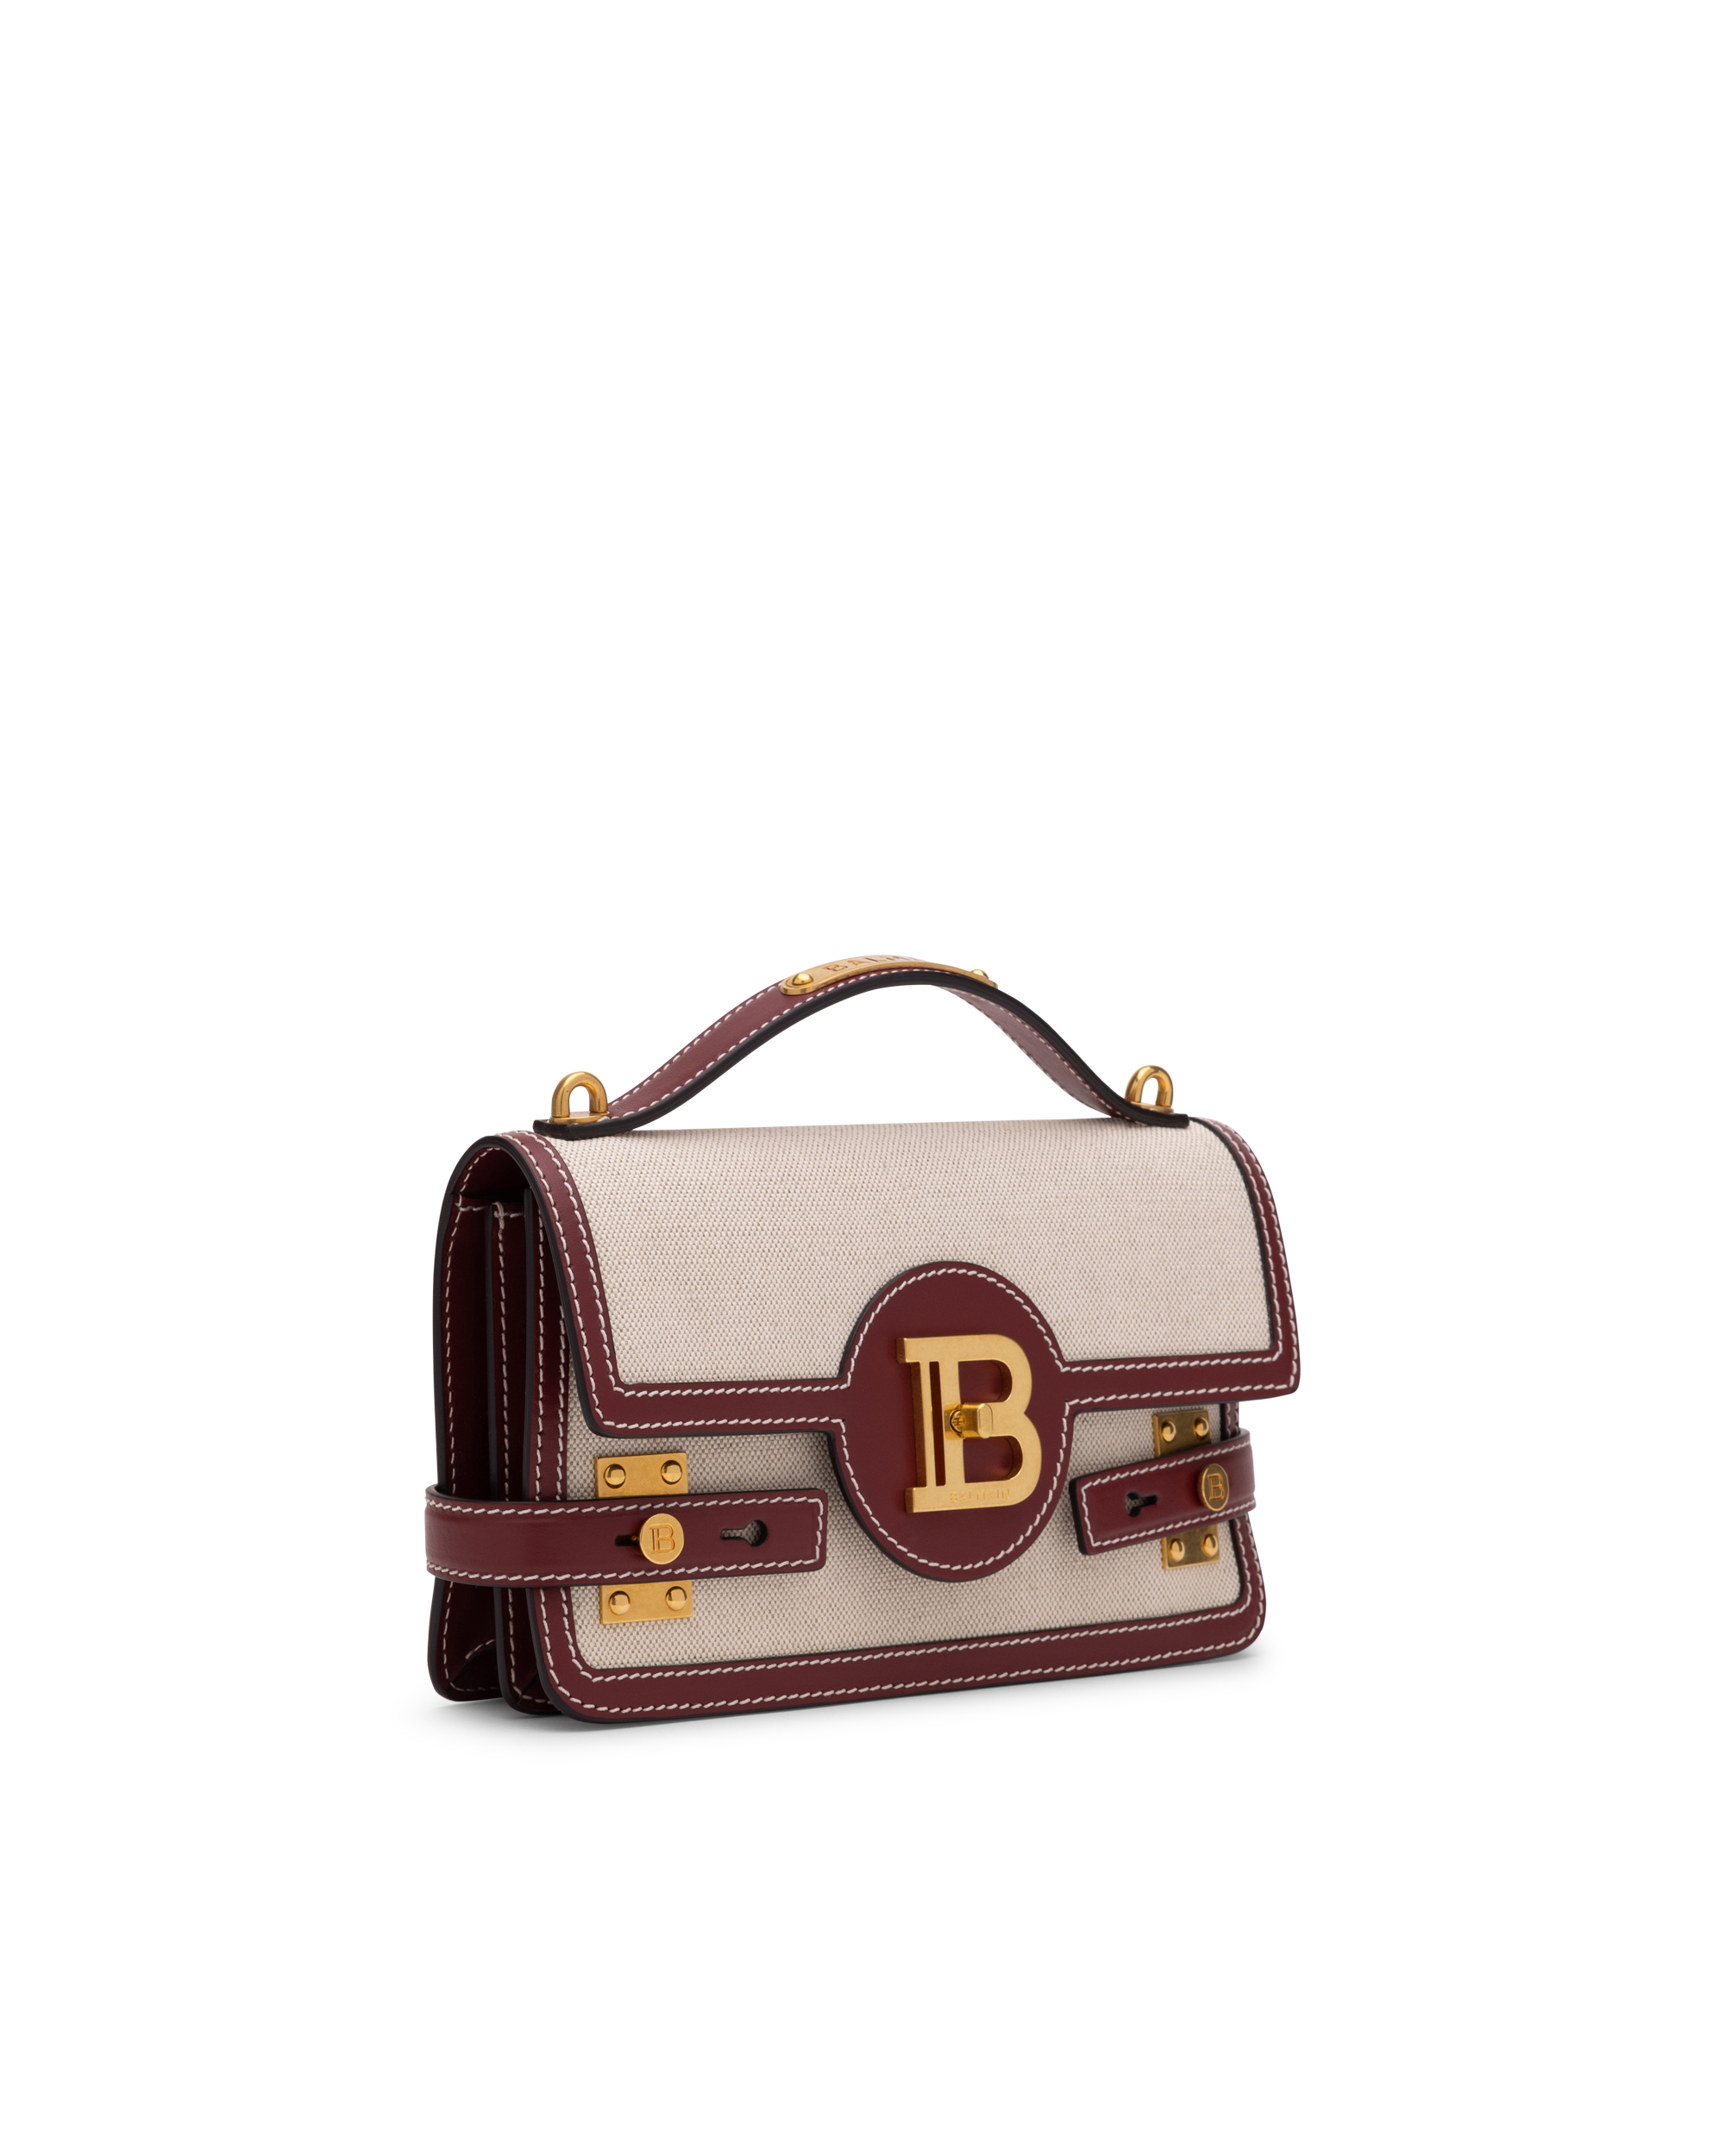 B-Buzz 24 Canvas and Leather Bag